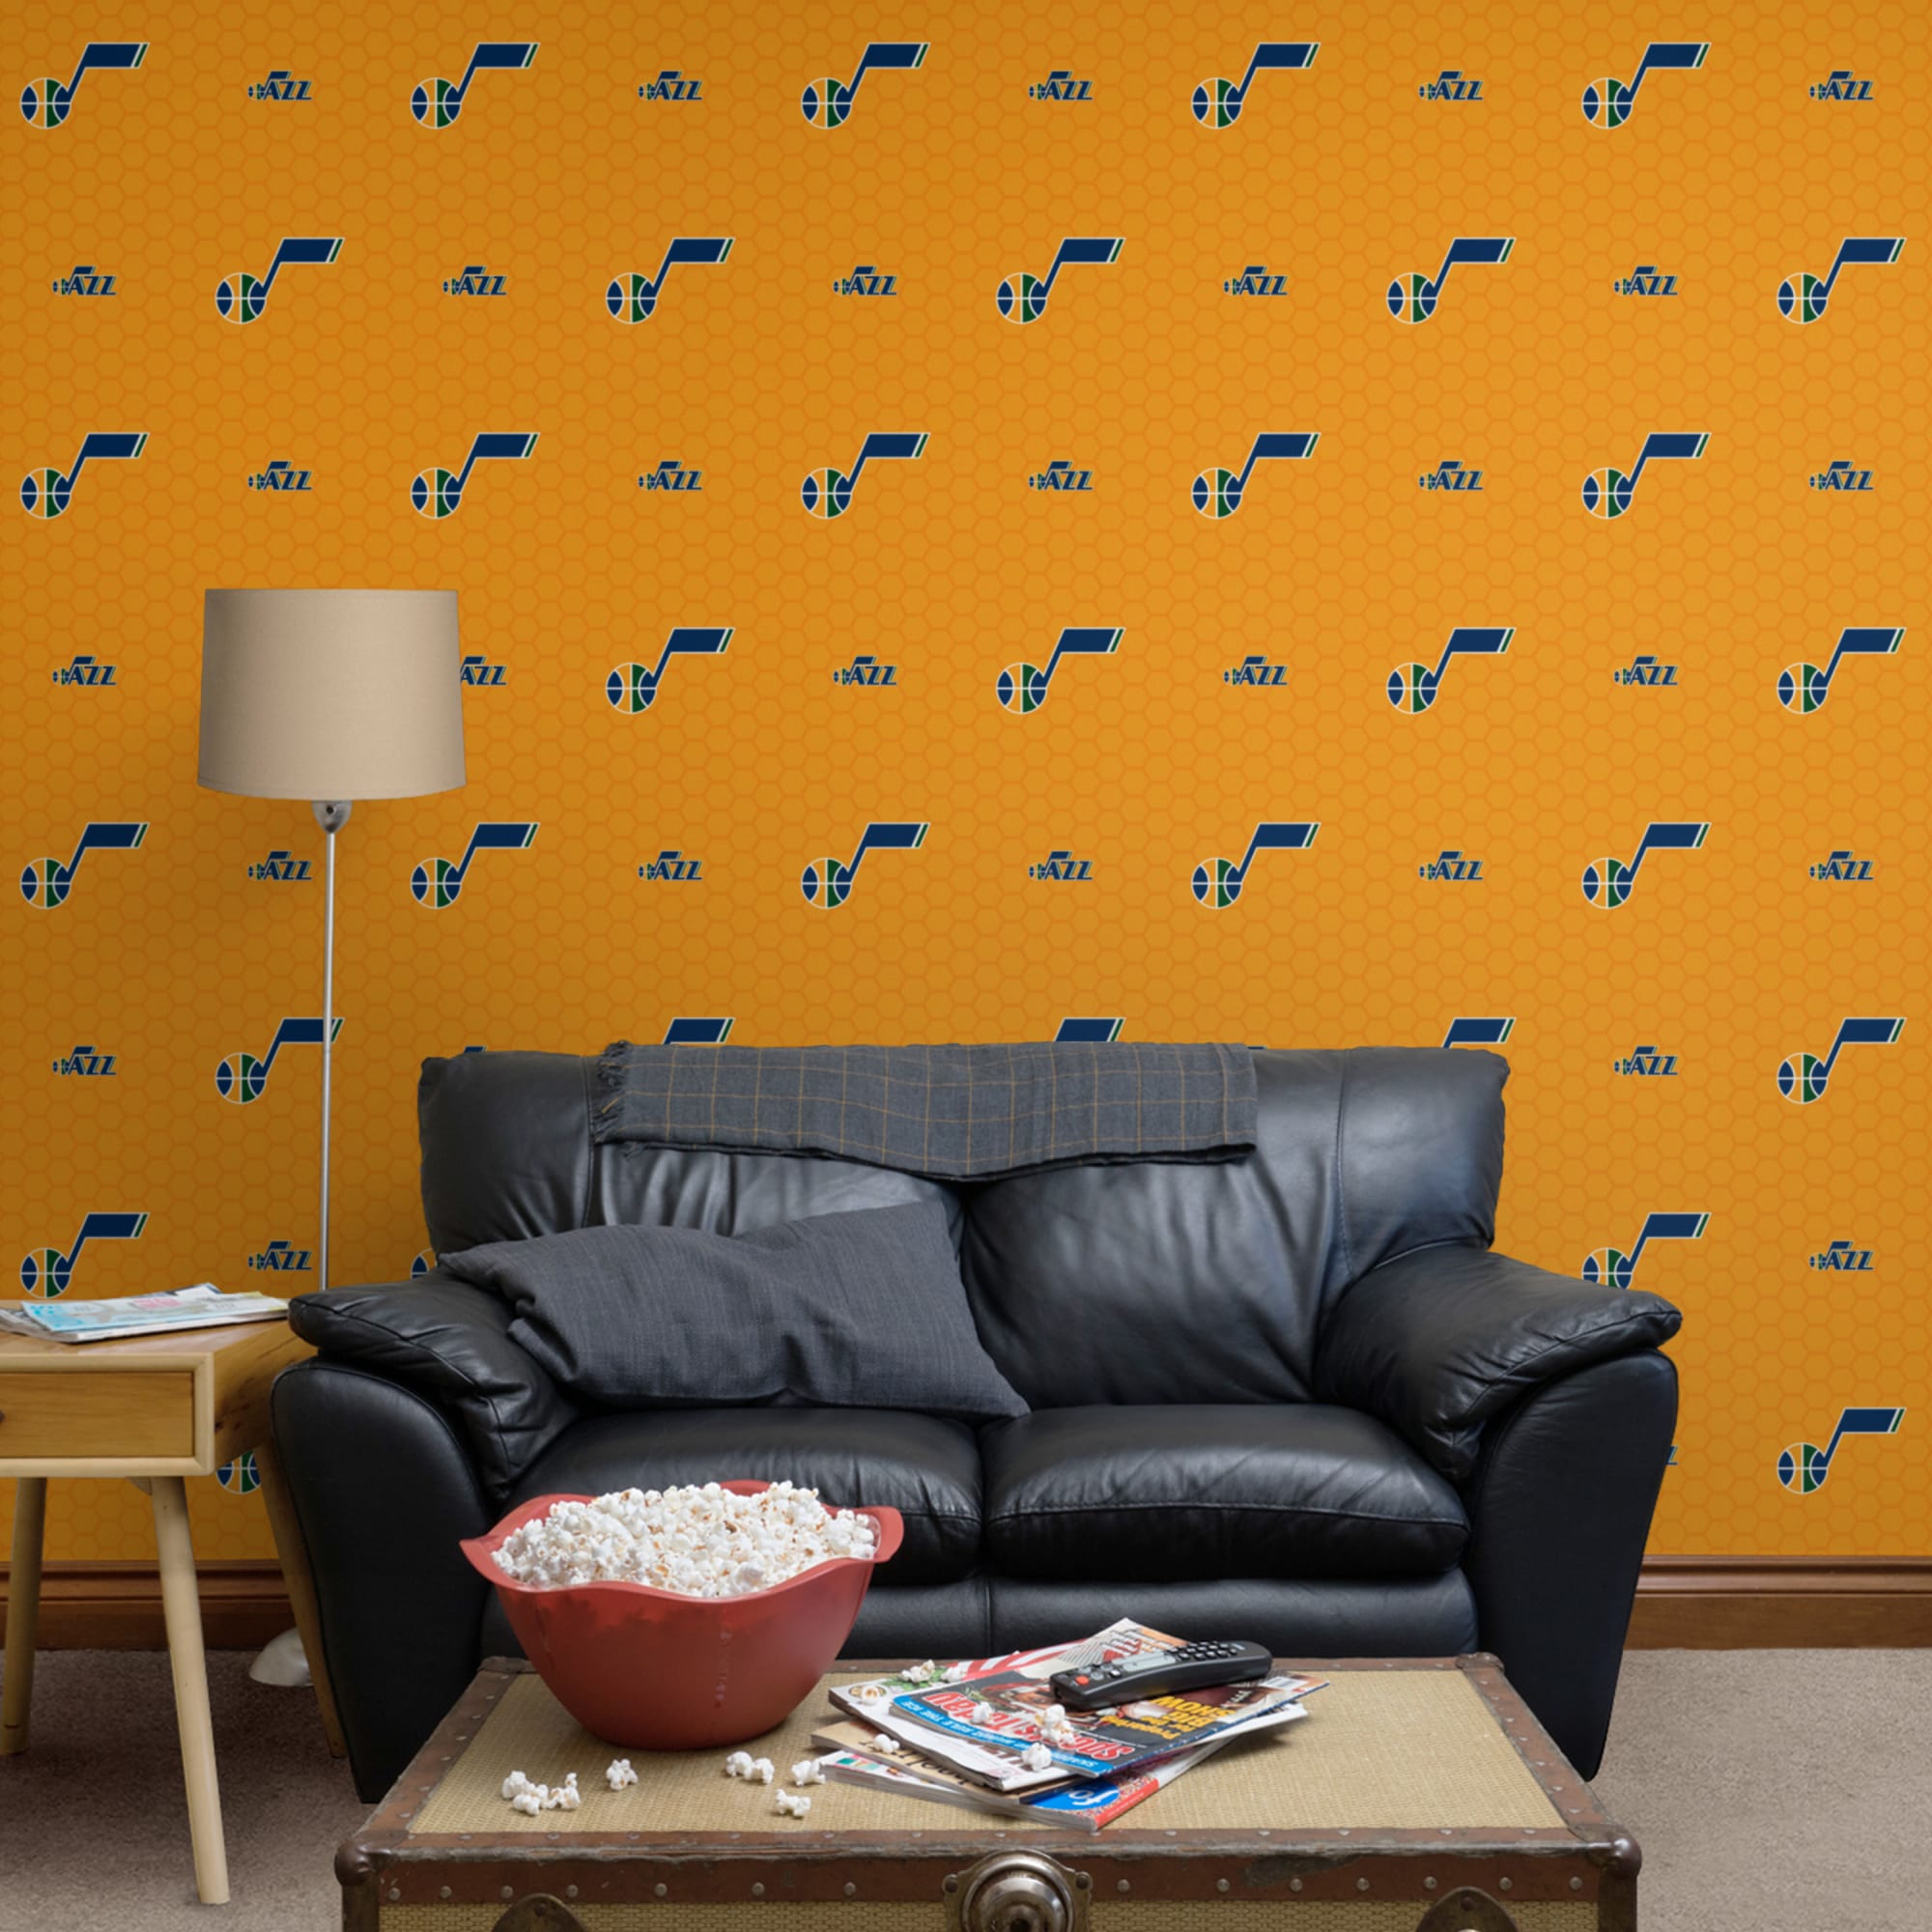 Utah Jazz: Logo Pattern - Officially Licensed Removable Wallpaper 12" x 12" Sample by Fathead